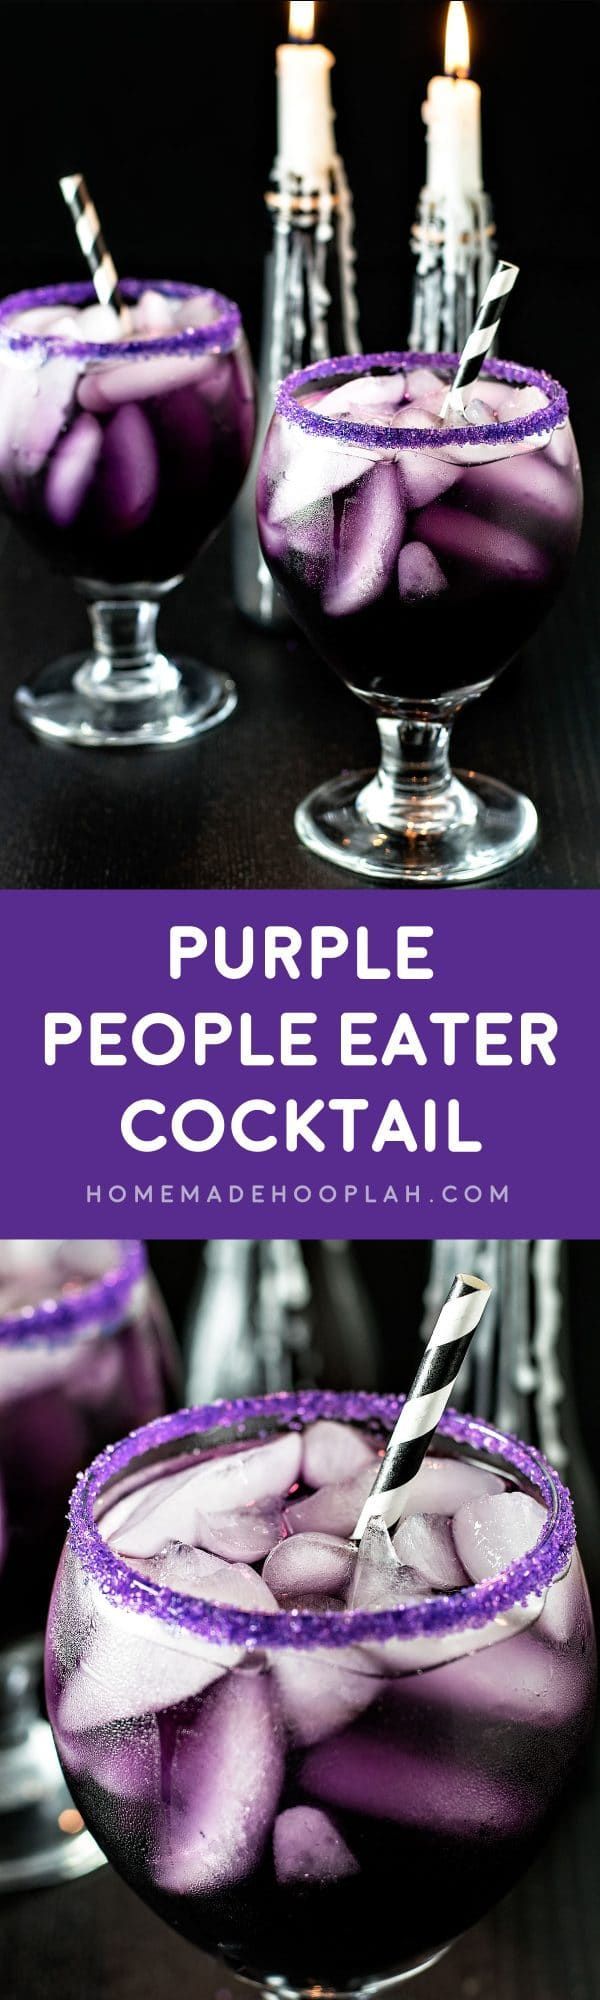 Purple People Eater Cocktail! A tasty (and creepy!) cocktail that get’s it’s purple hue from blue curacao, grenadine, and